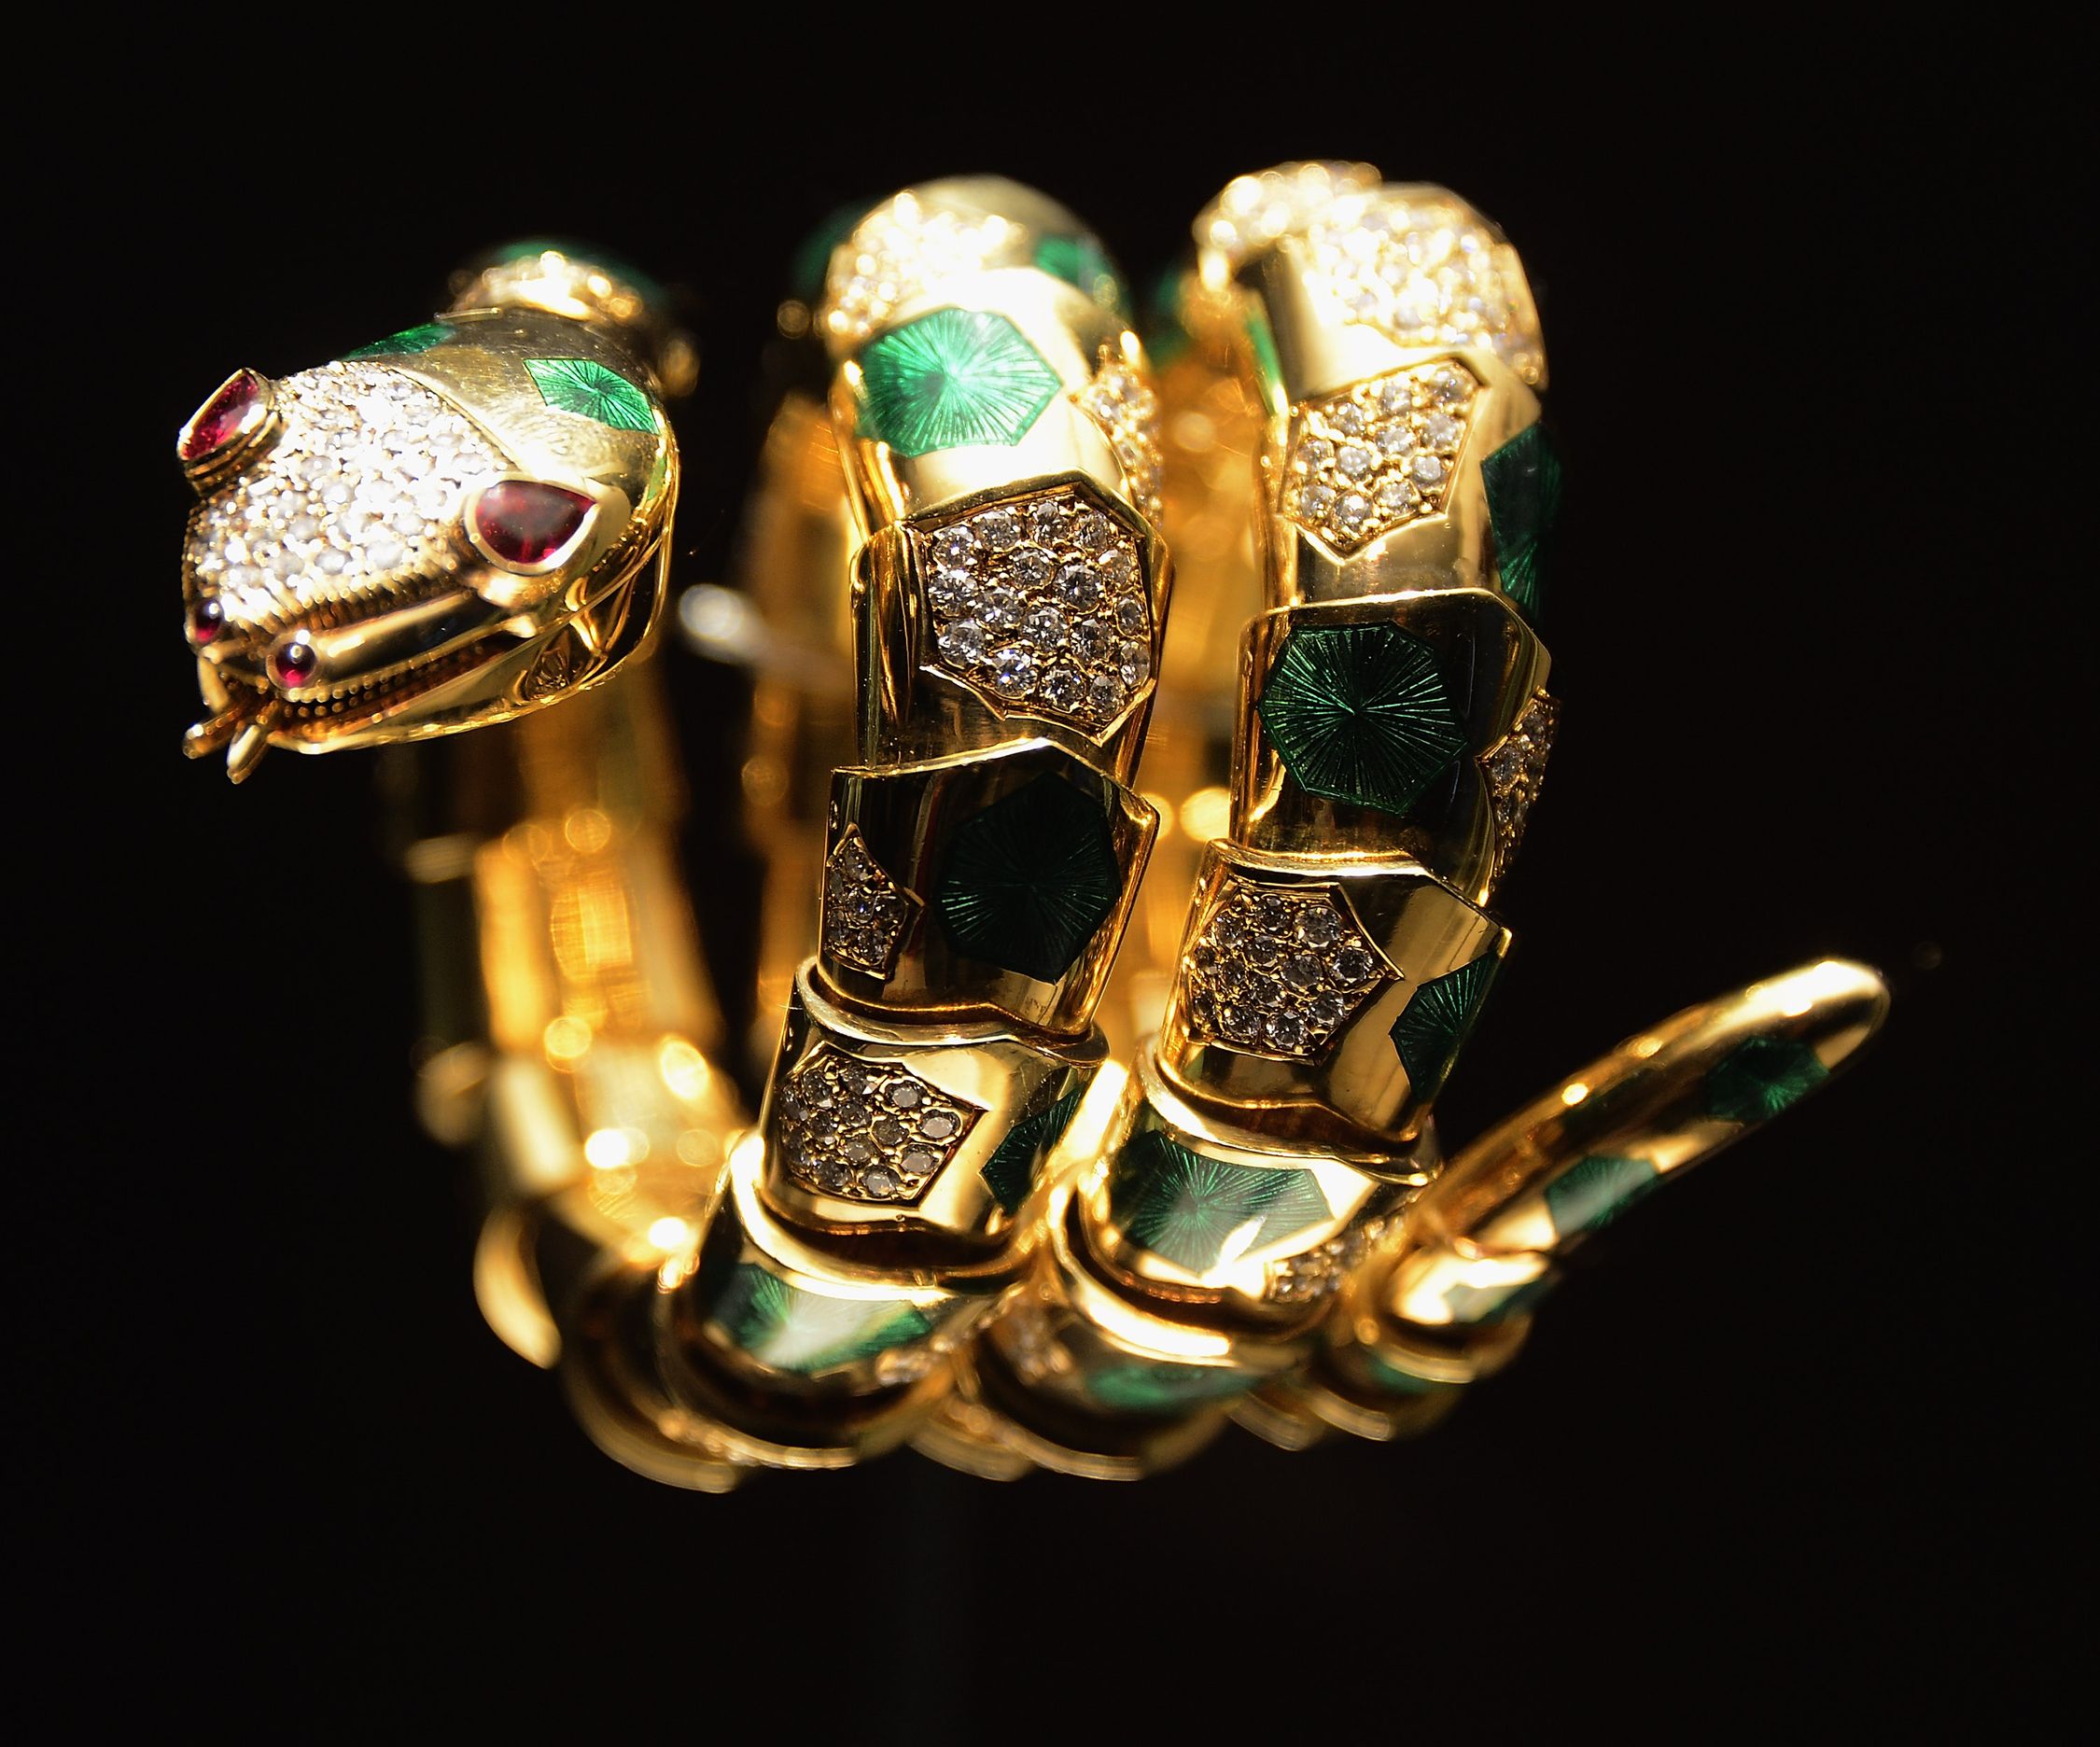 Why the Bulgari Serpenti is one of the most iconic design of all times